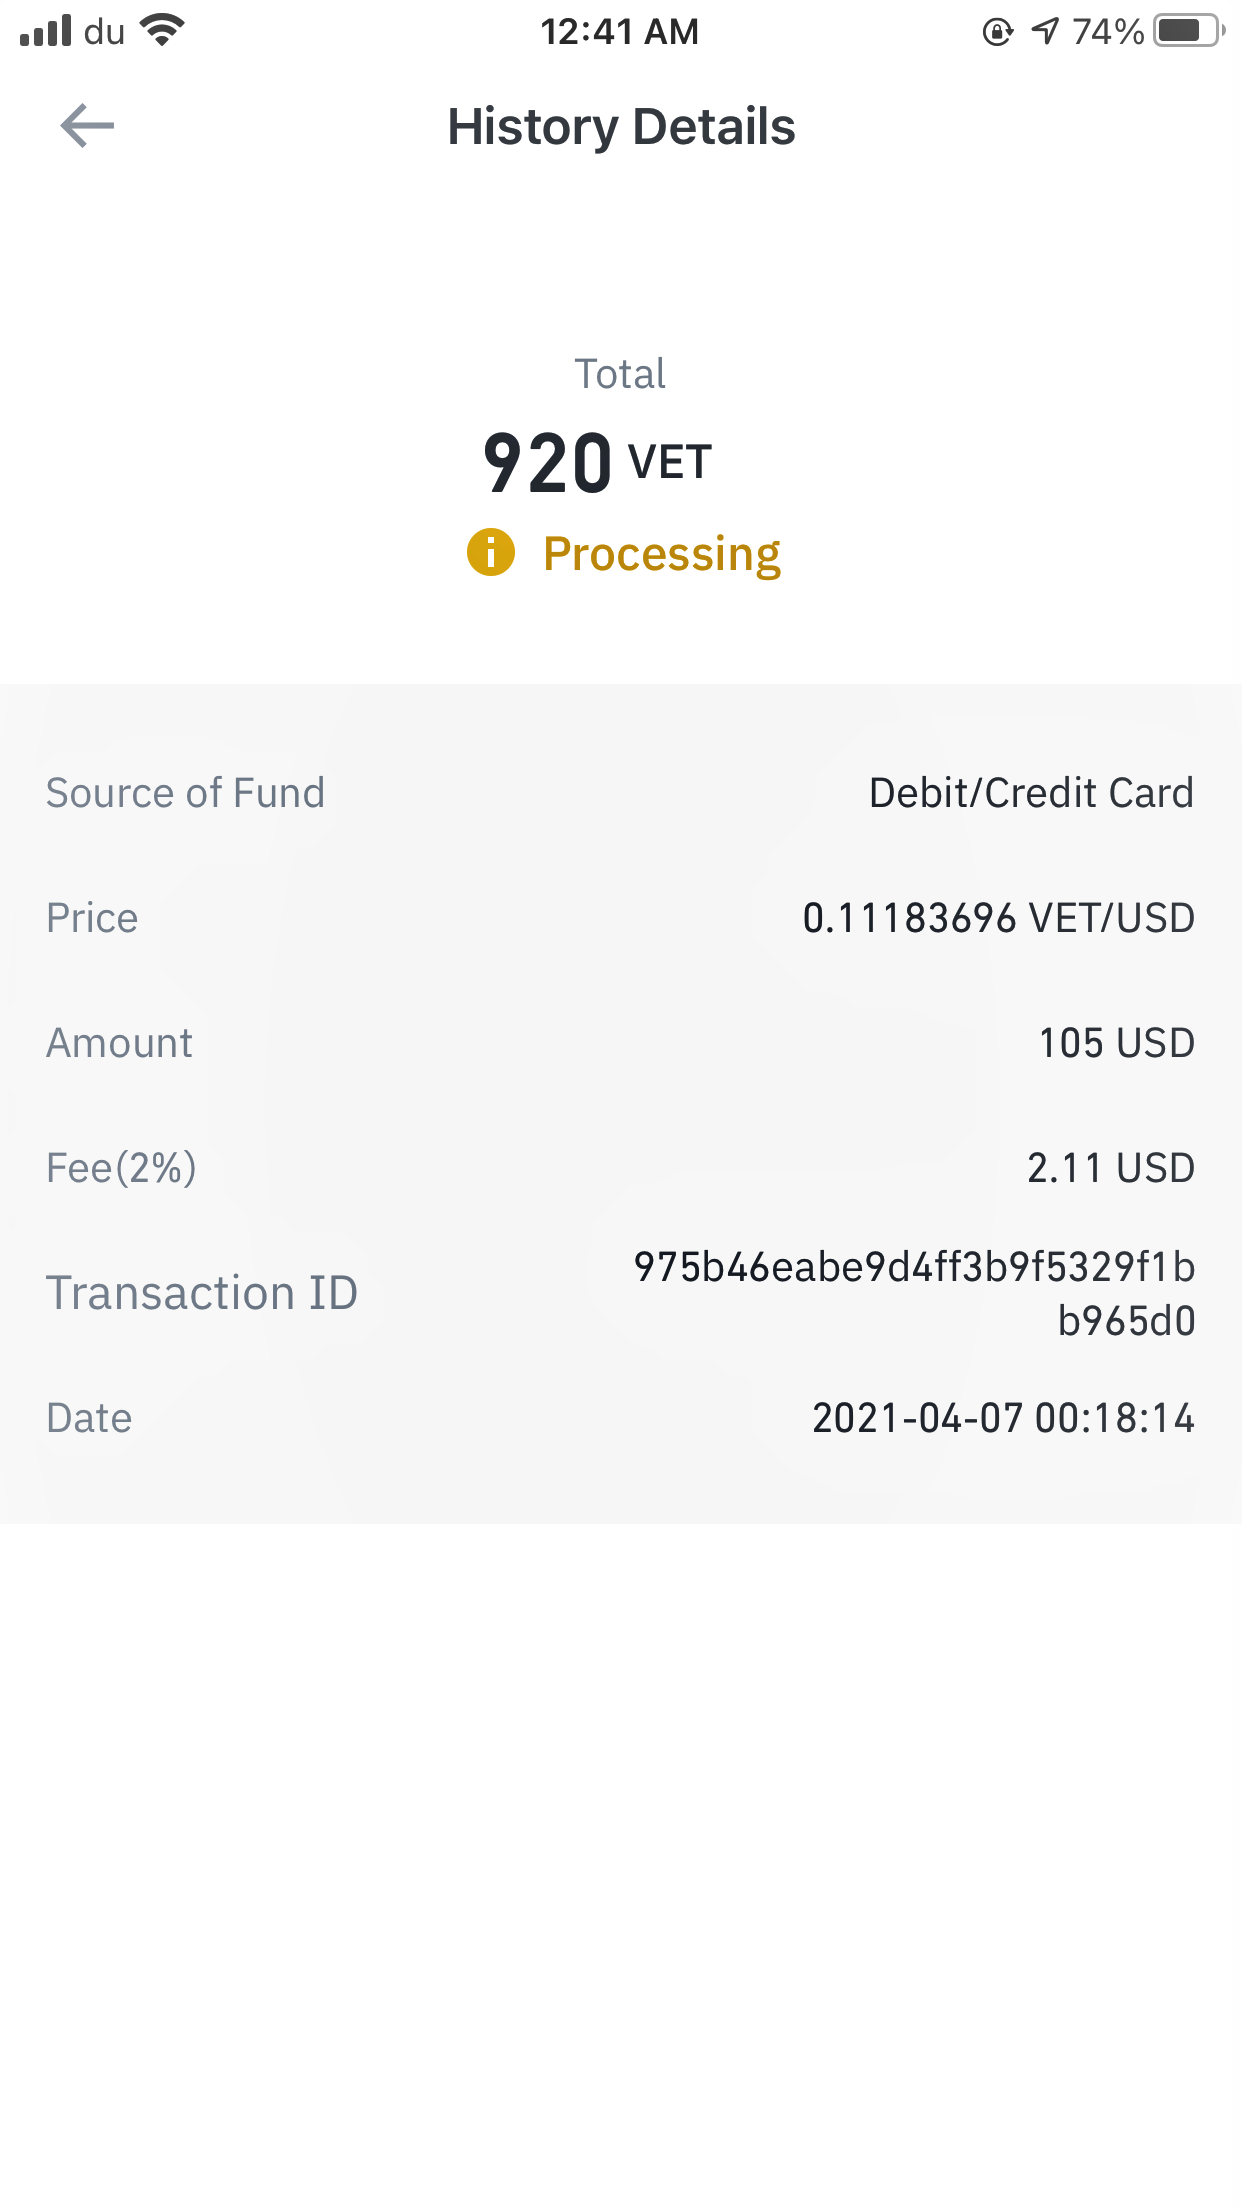 Binance complaint Transaction done on 7th April 2021 still shows processing